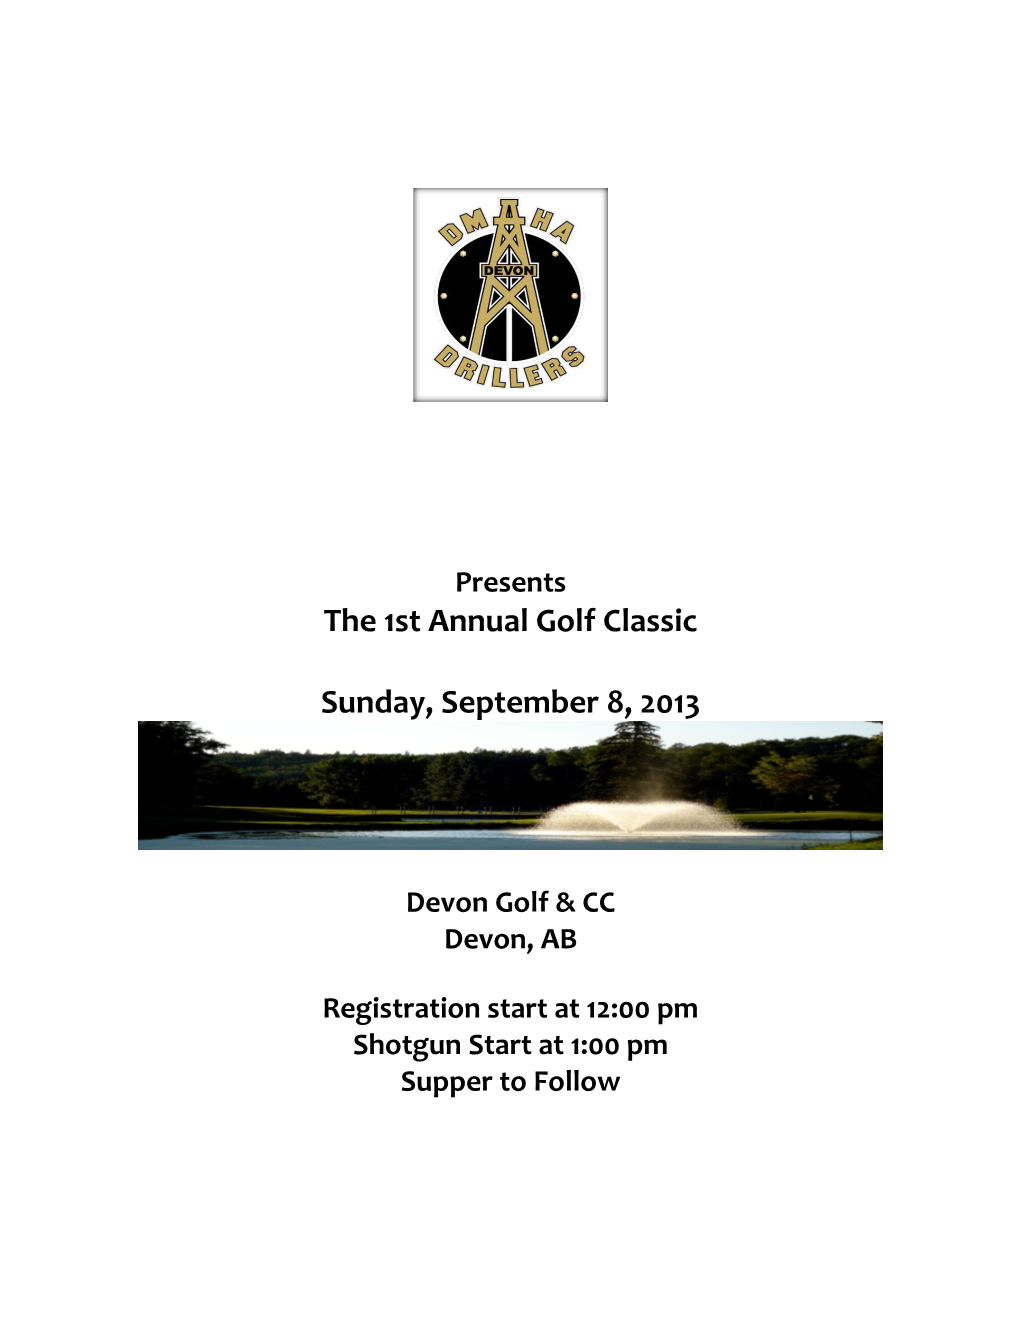 The 1St Annual Golf Classic